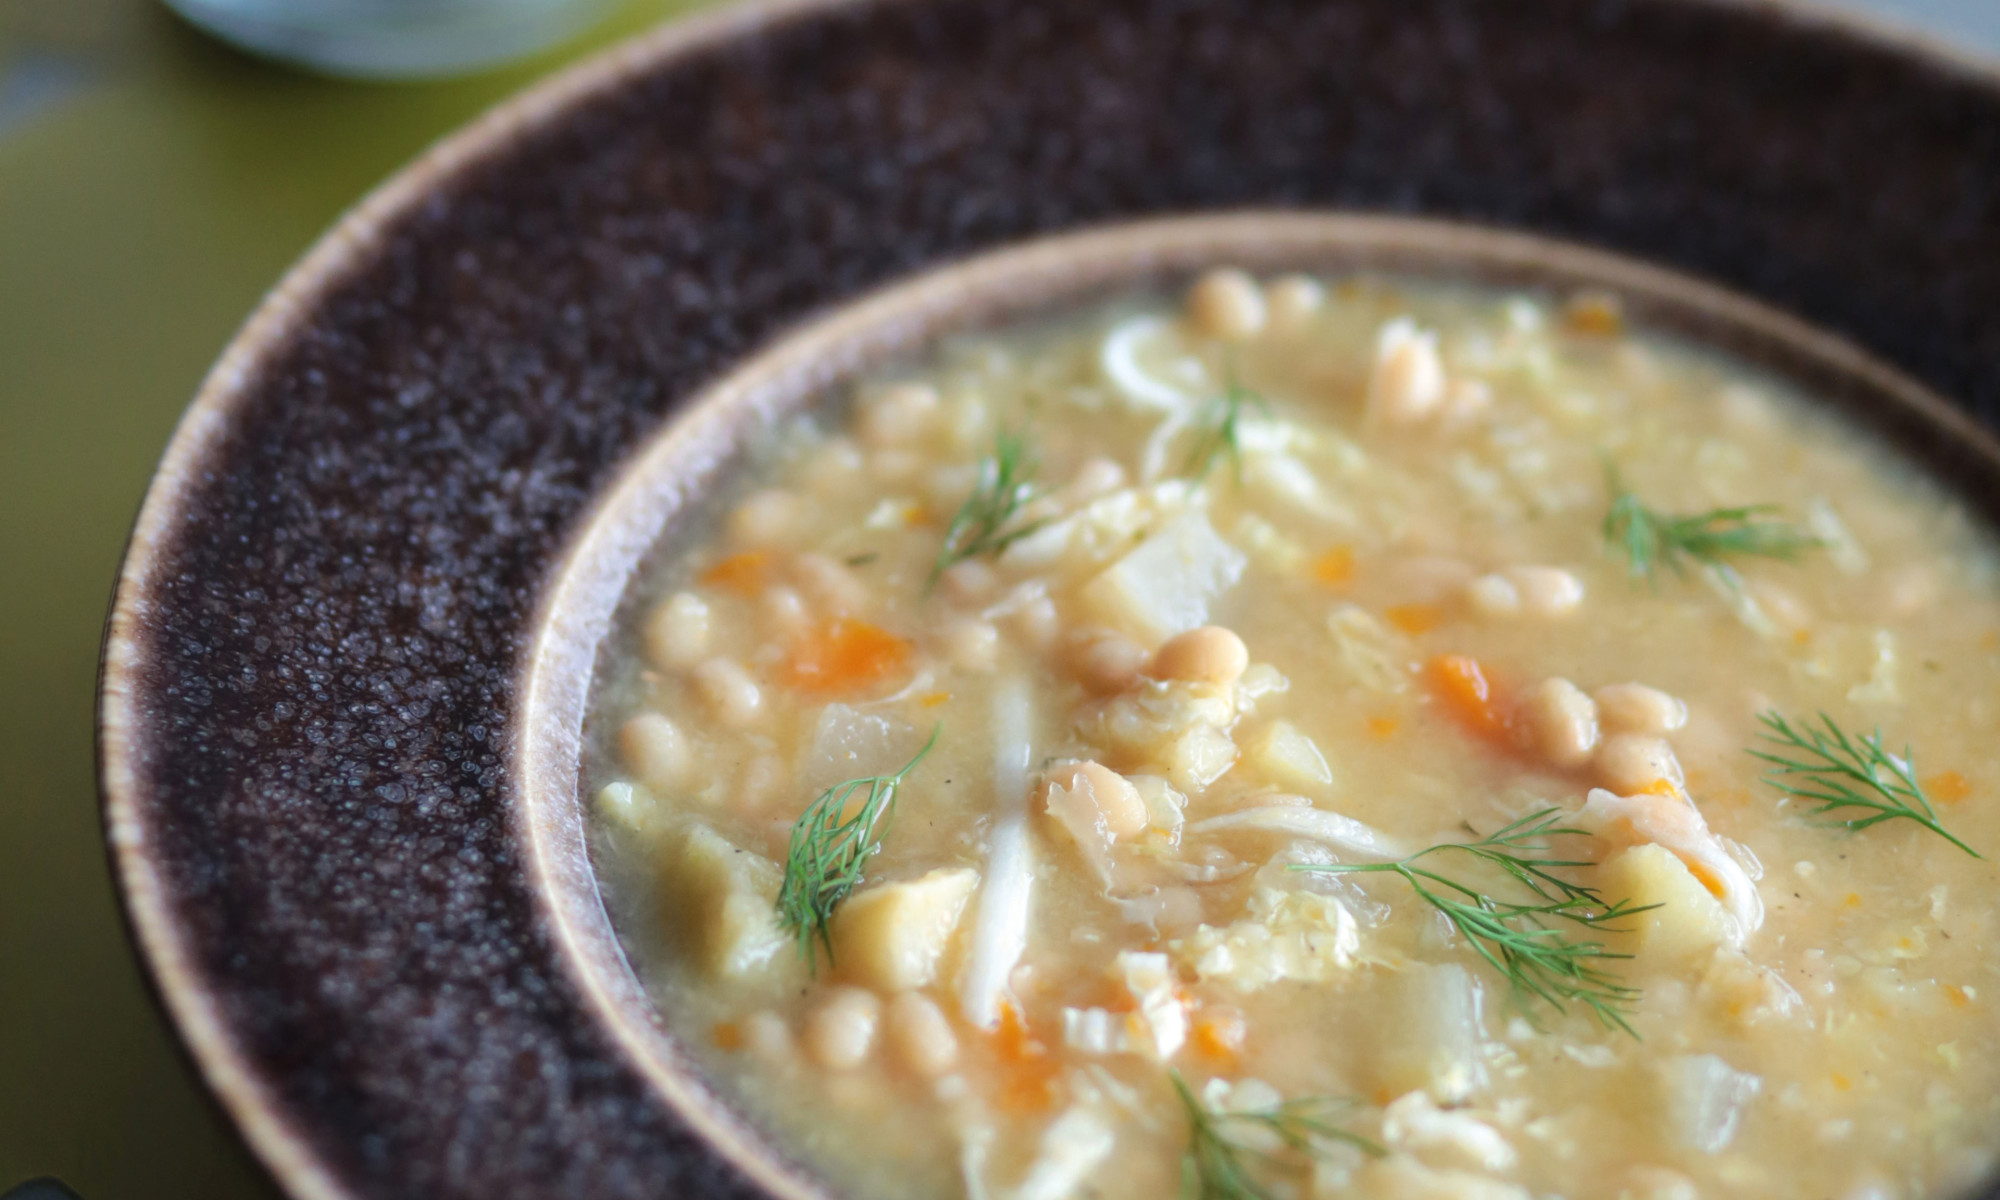 This Lemony Leek Soup Is Packed With Gut-Friendly Veggies & Plant Protein